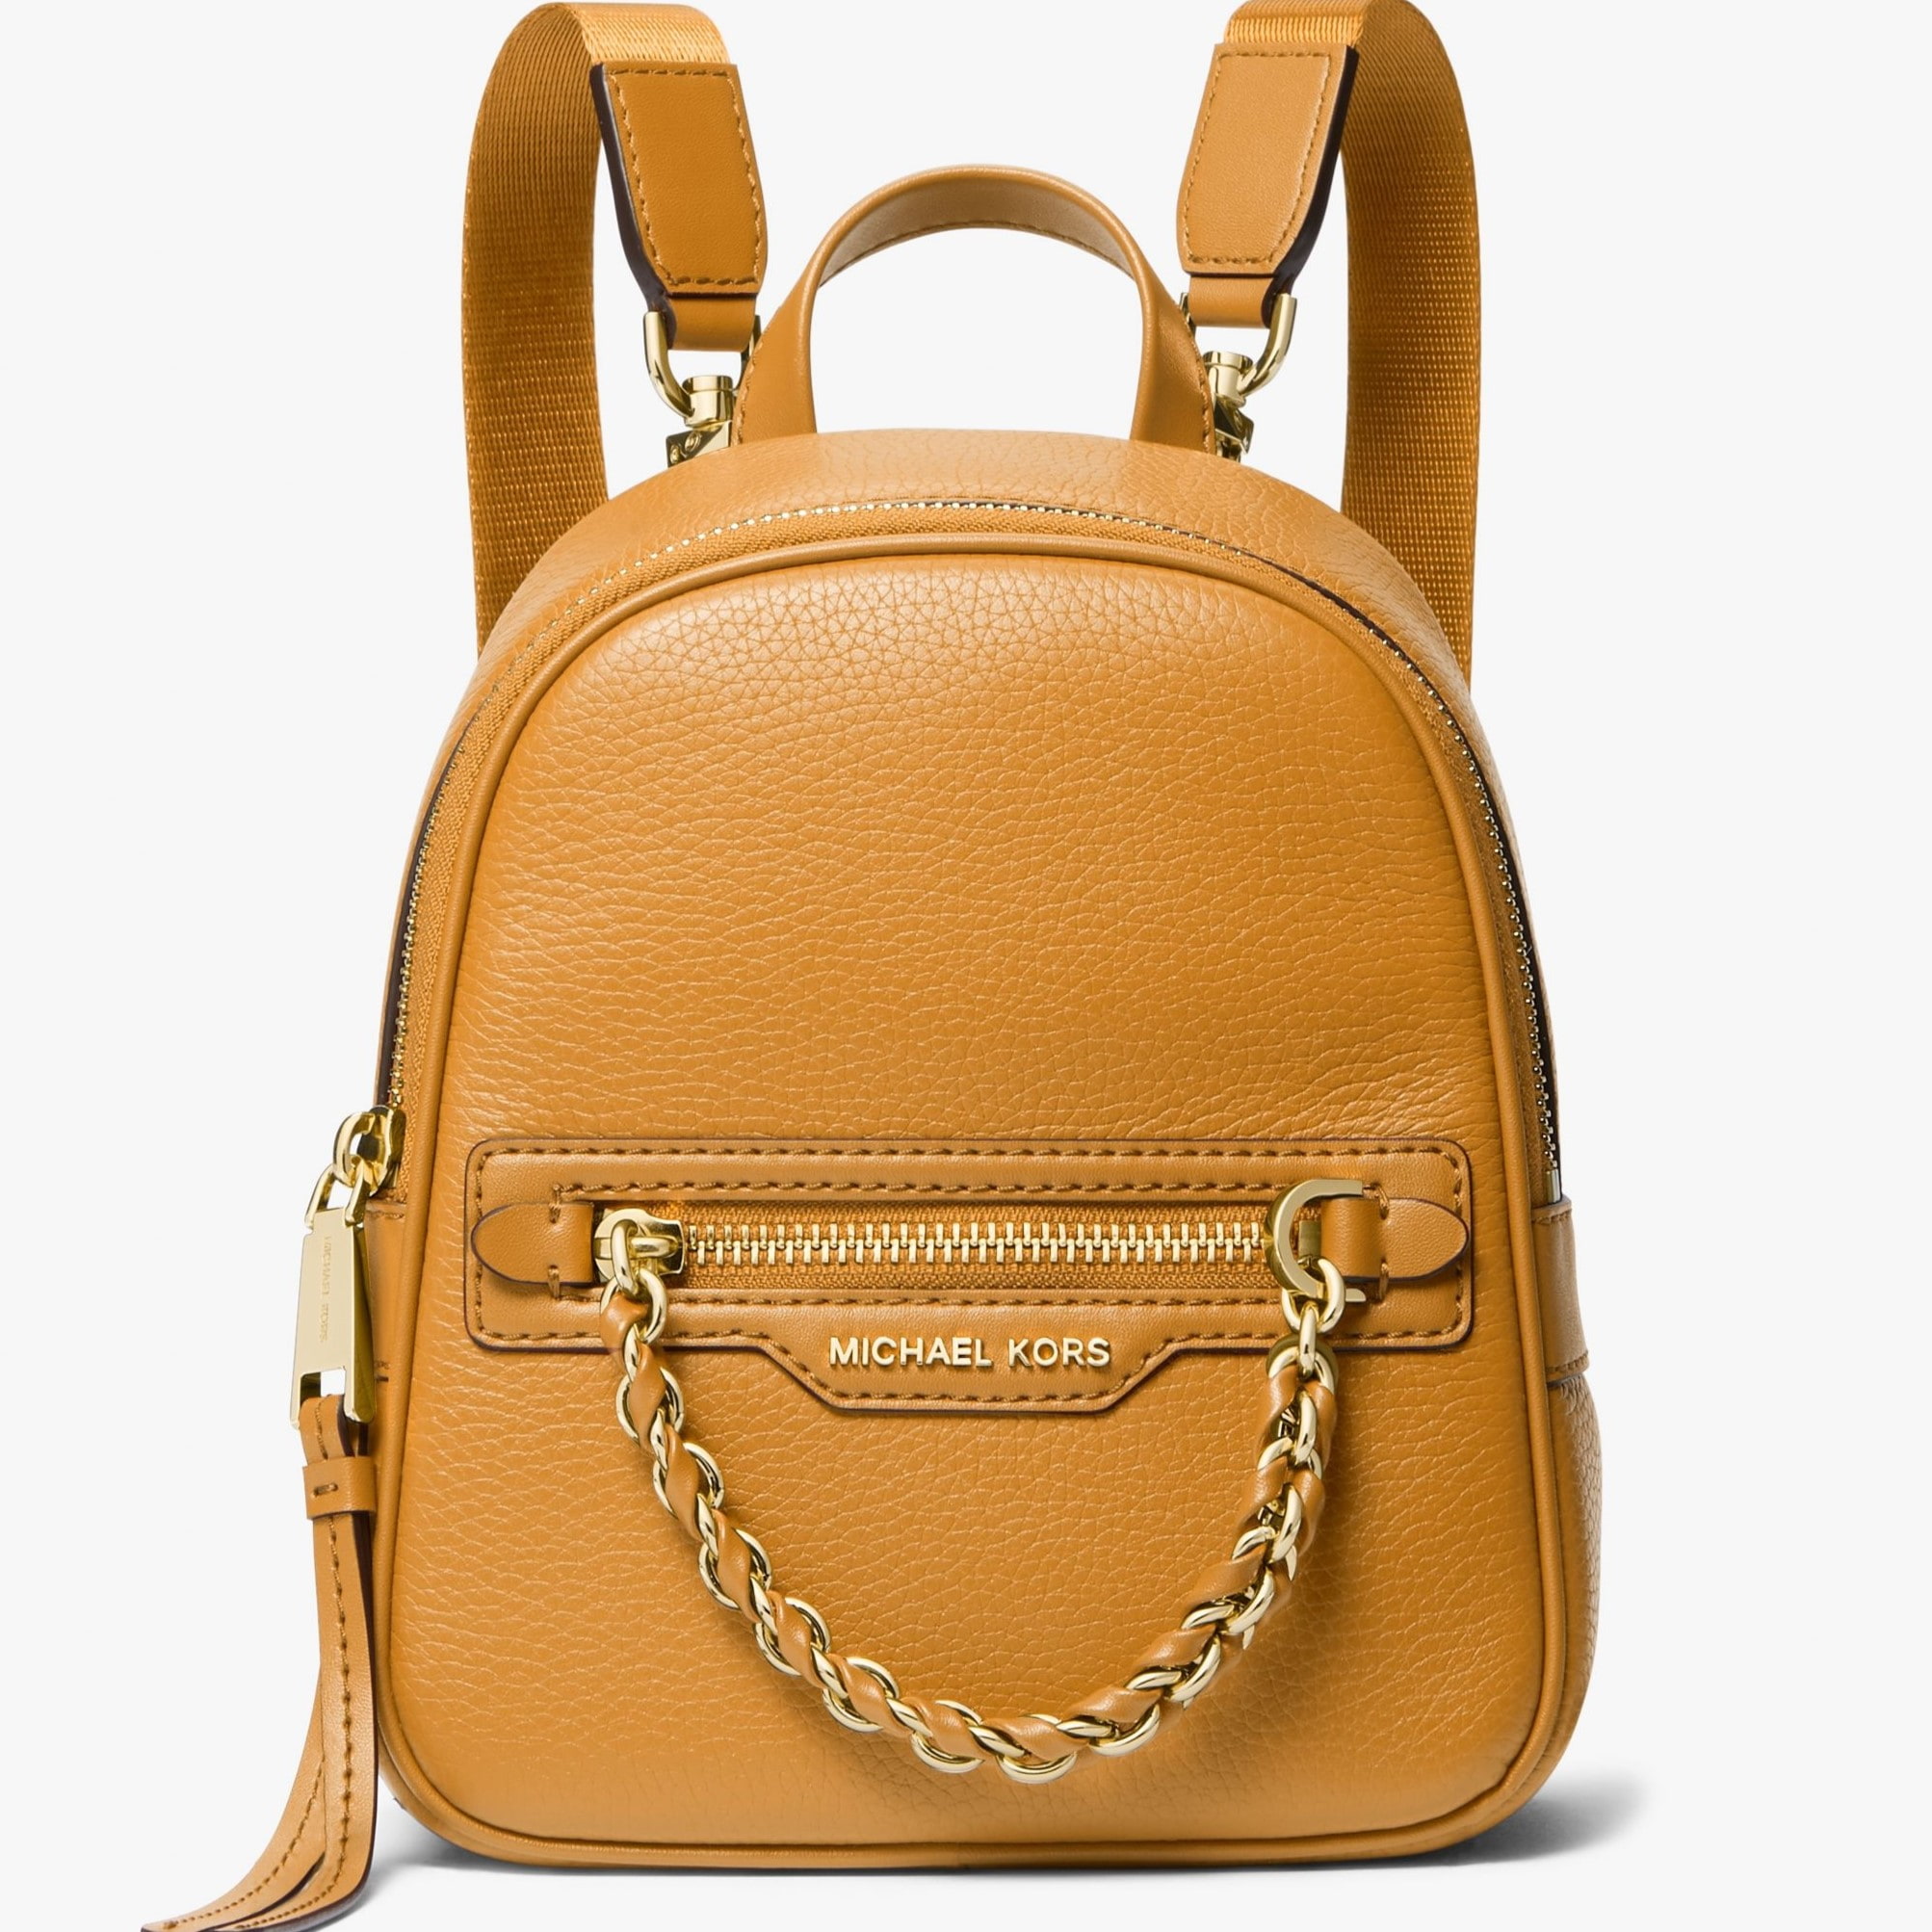 BALO MK NỮ MICHAEL KORS ELLIOT EXTRA SMALL YELLOW LEATHER BACKPACK 30F3G5EB0L878 3